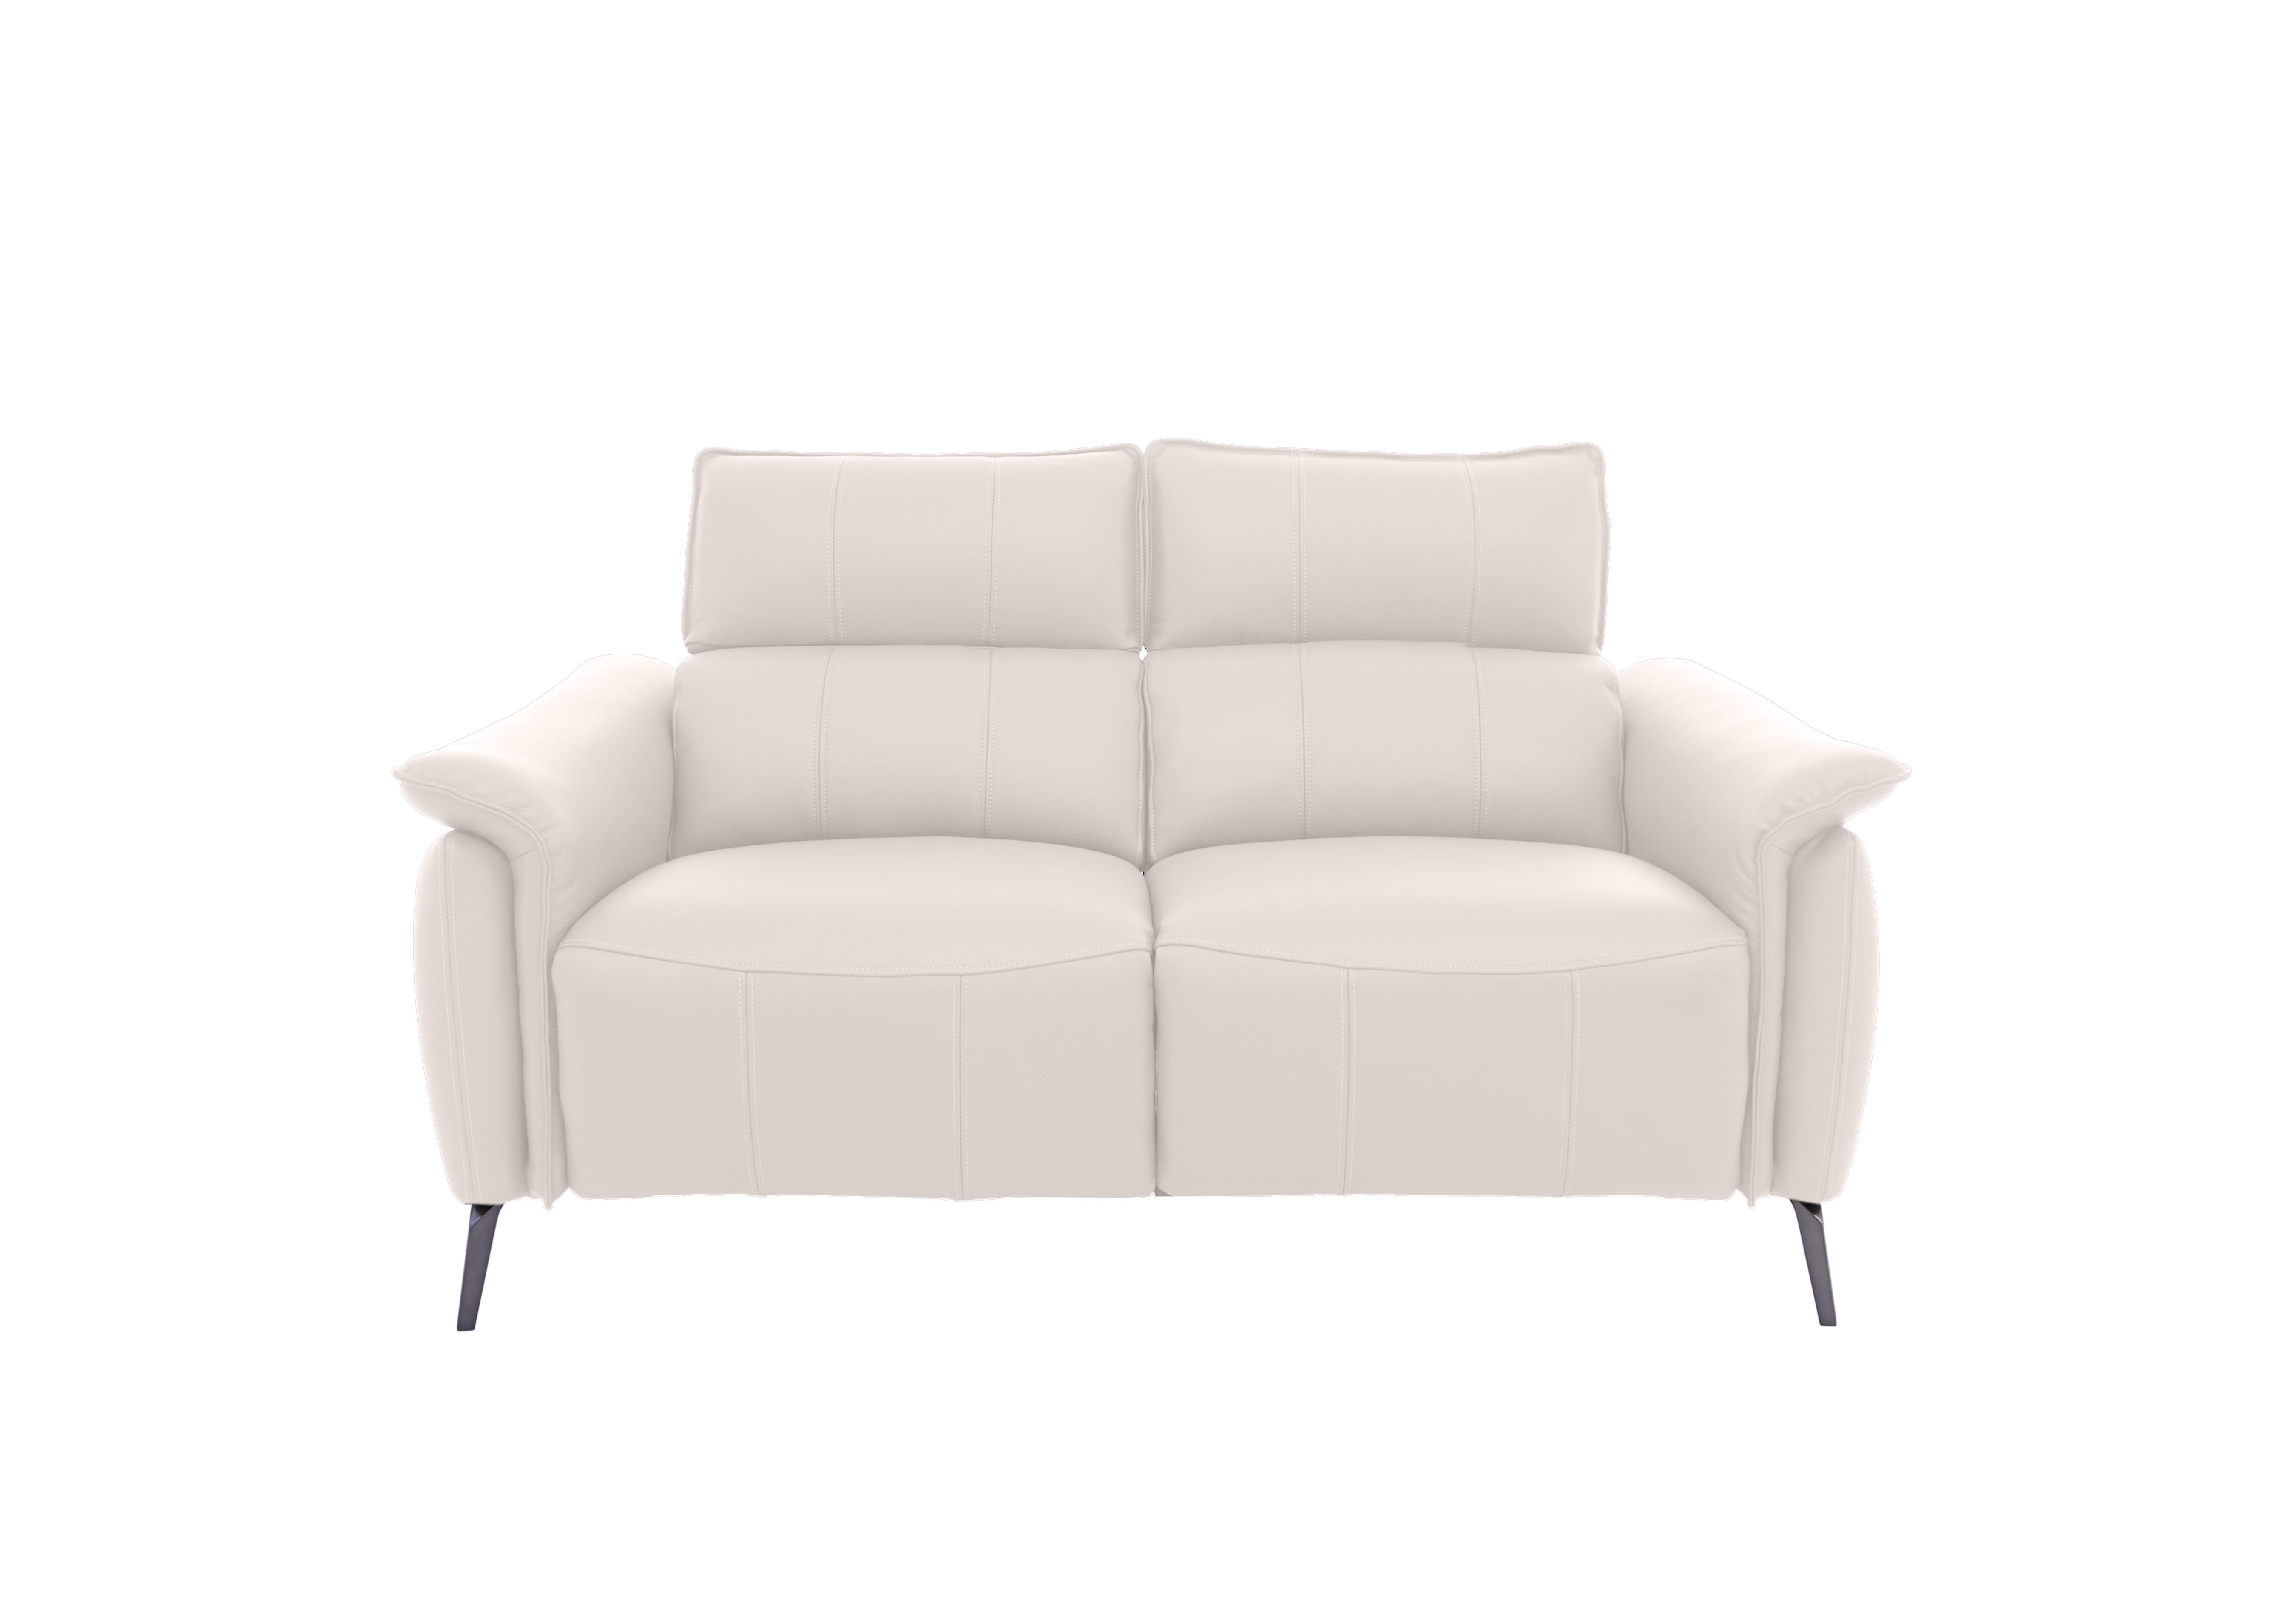 Jude 2 Seater Leather Sofa in Montana Cotton Cat-40/13 on Furniture Village